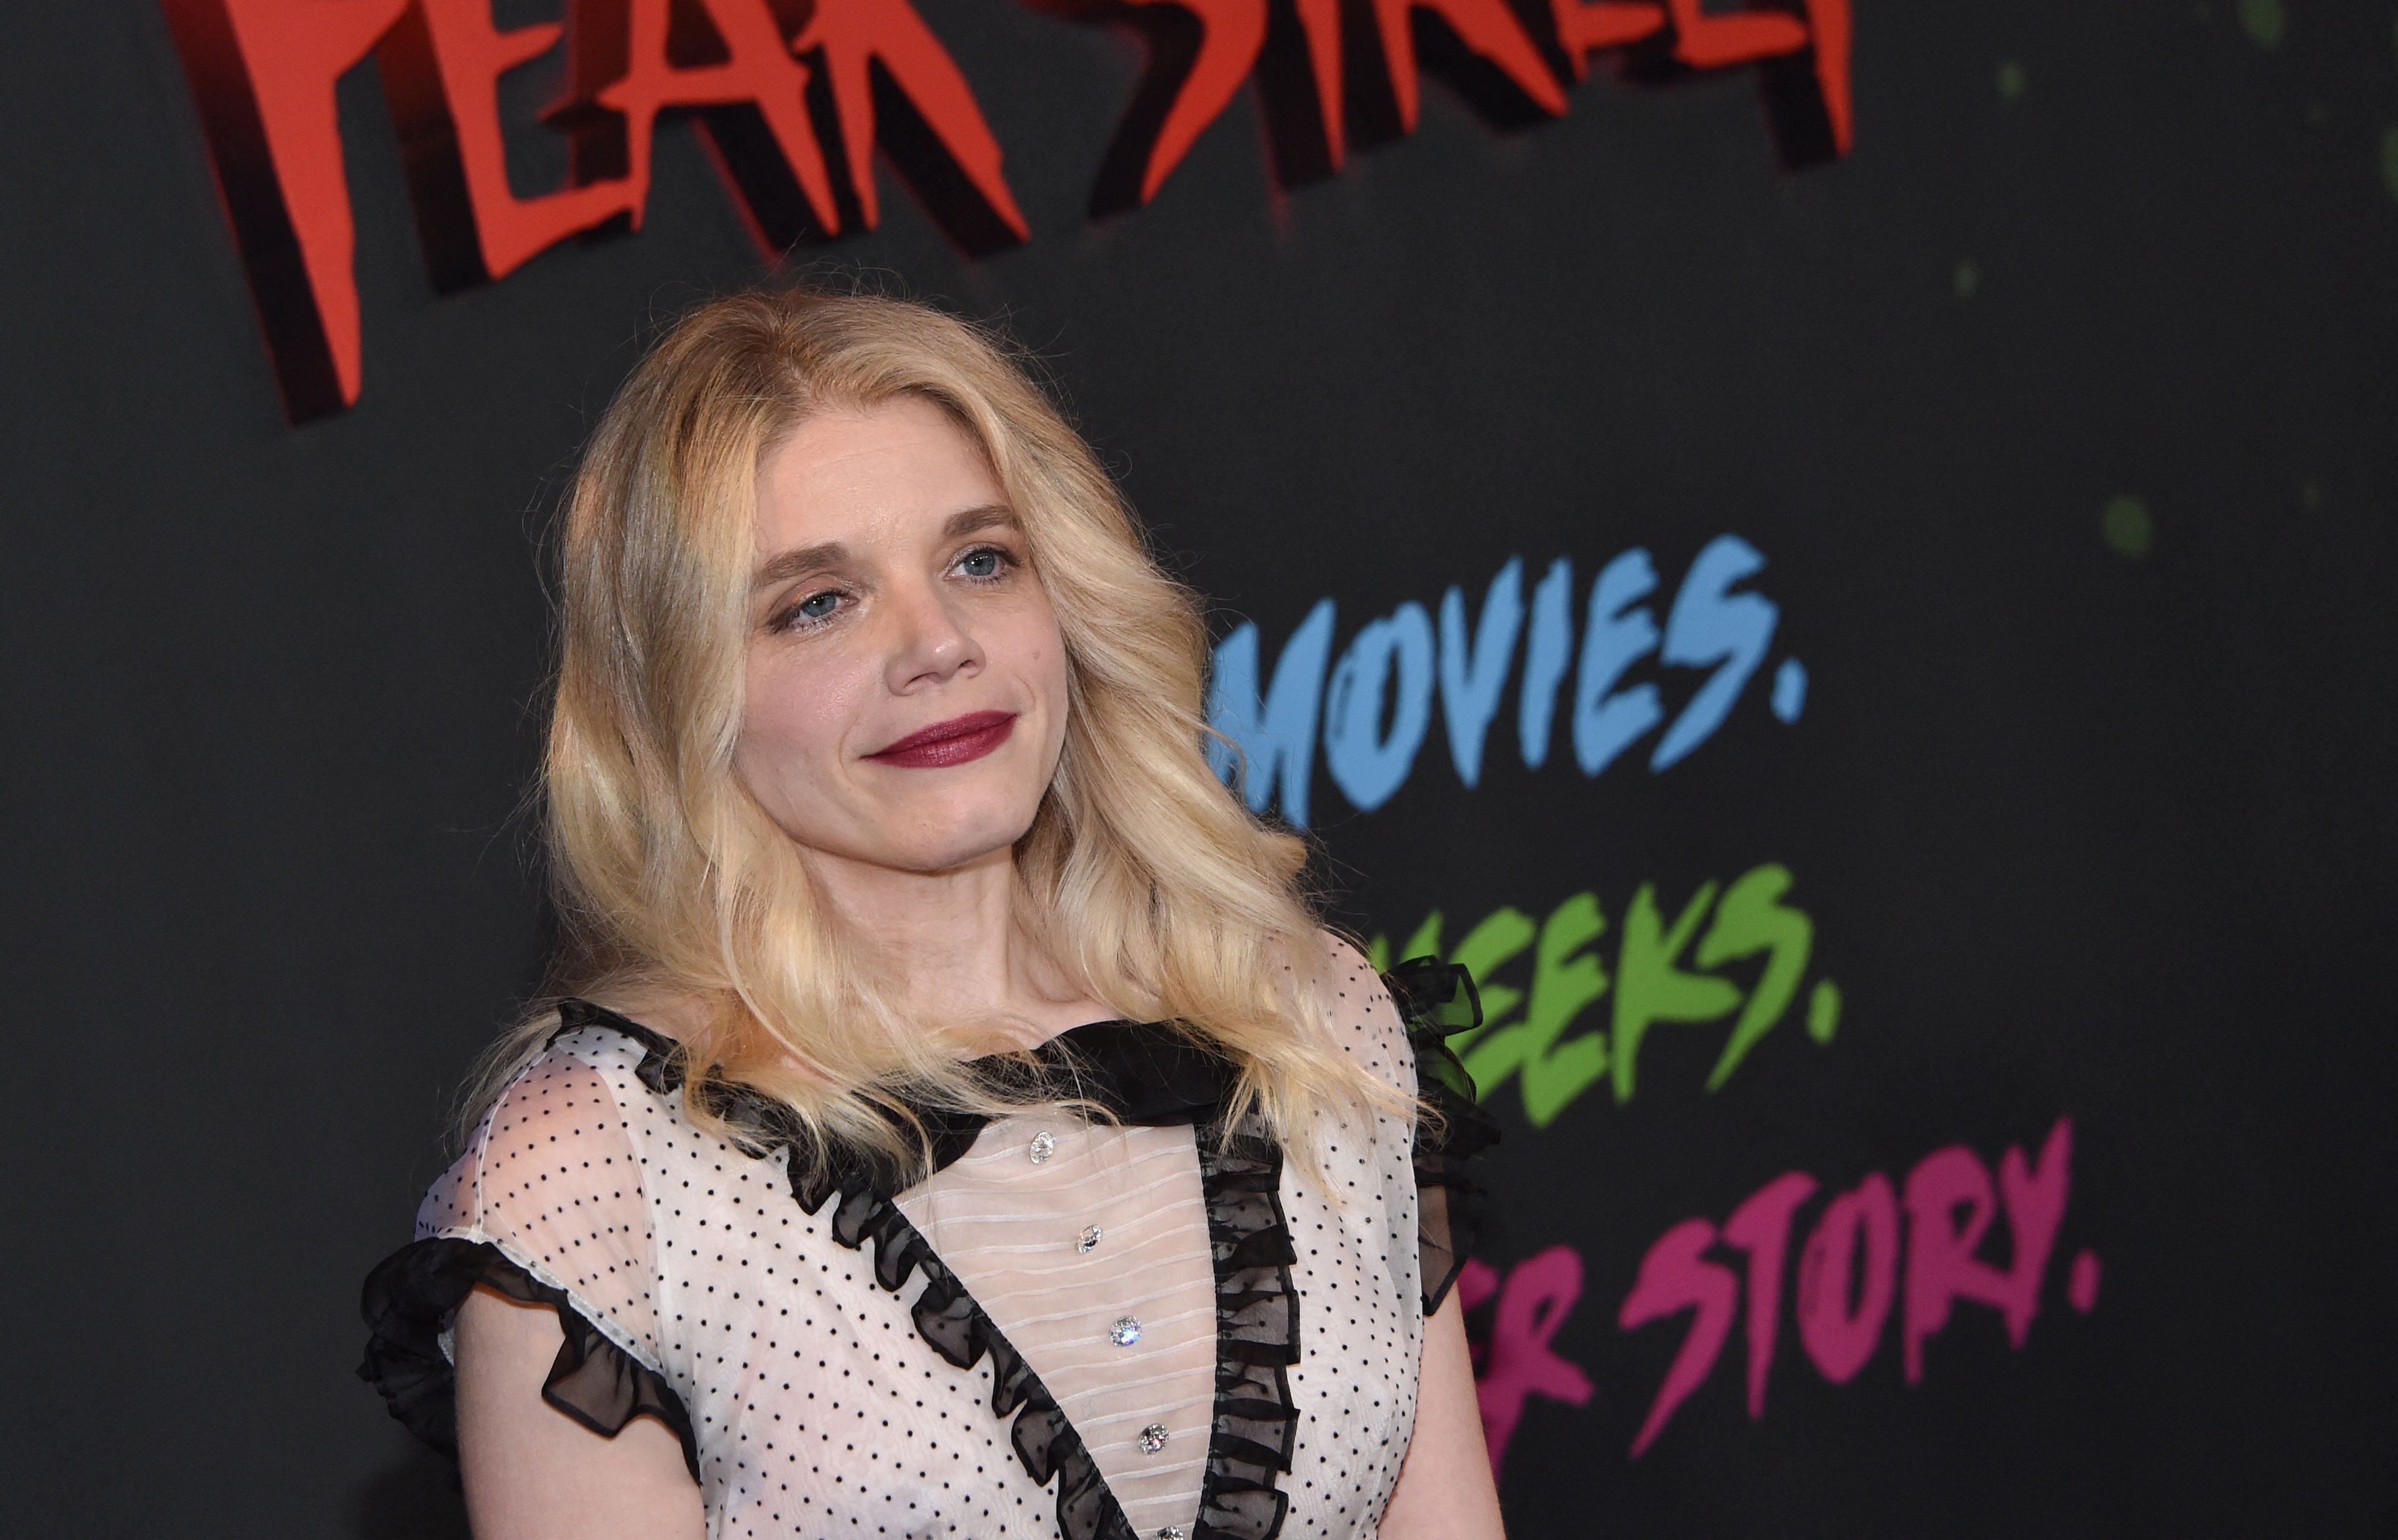 Netflix's 'Fear Street' director Leigh Janiak wearing a black and white polkadot dress and red lipstick at the film premiere